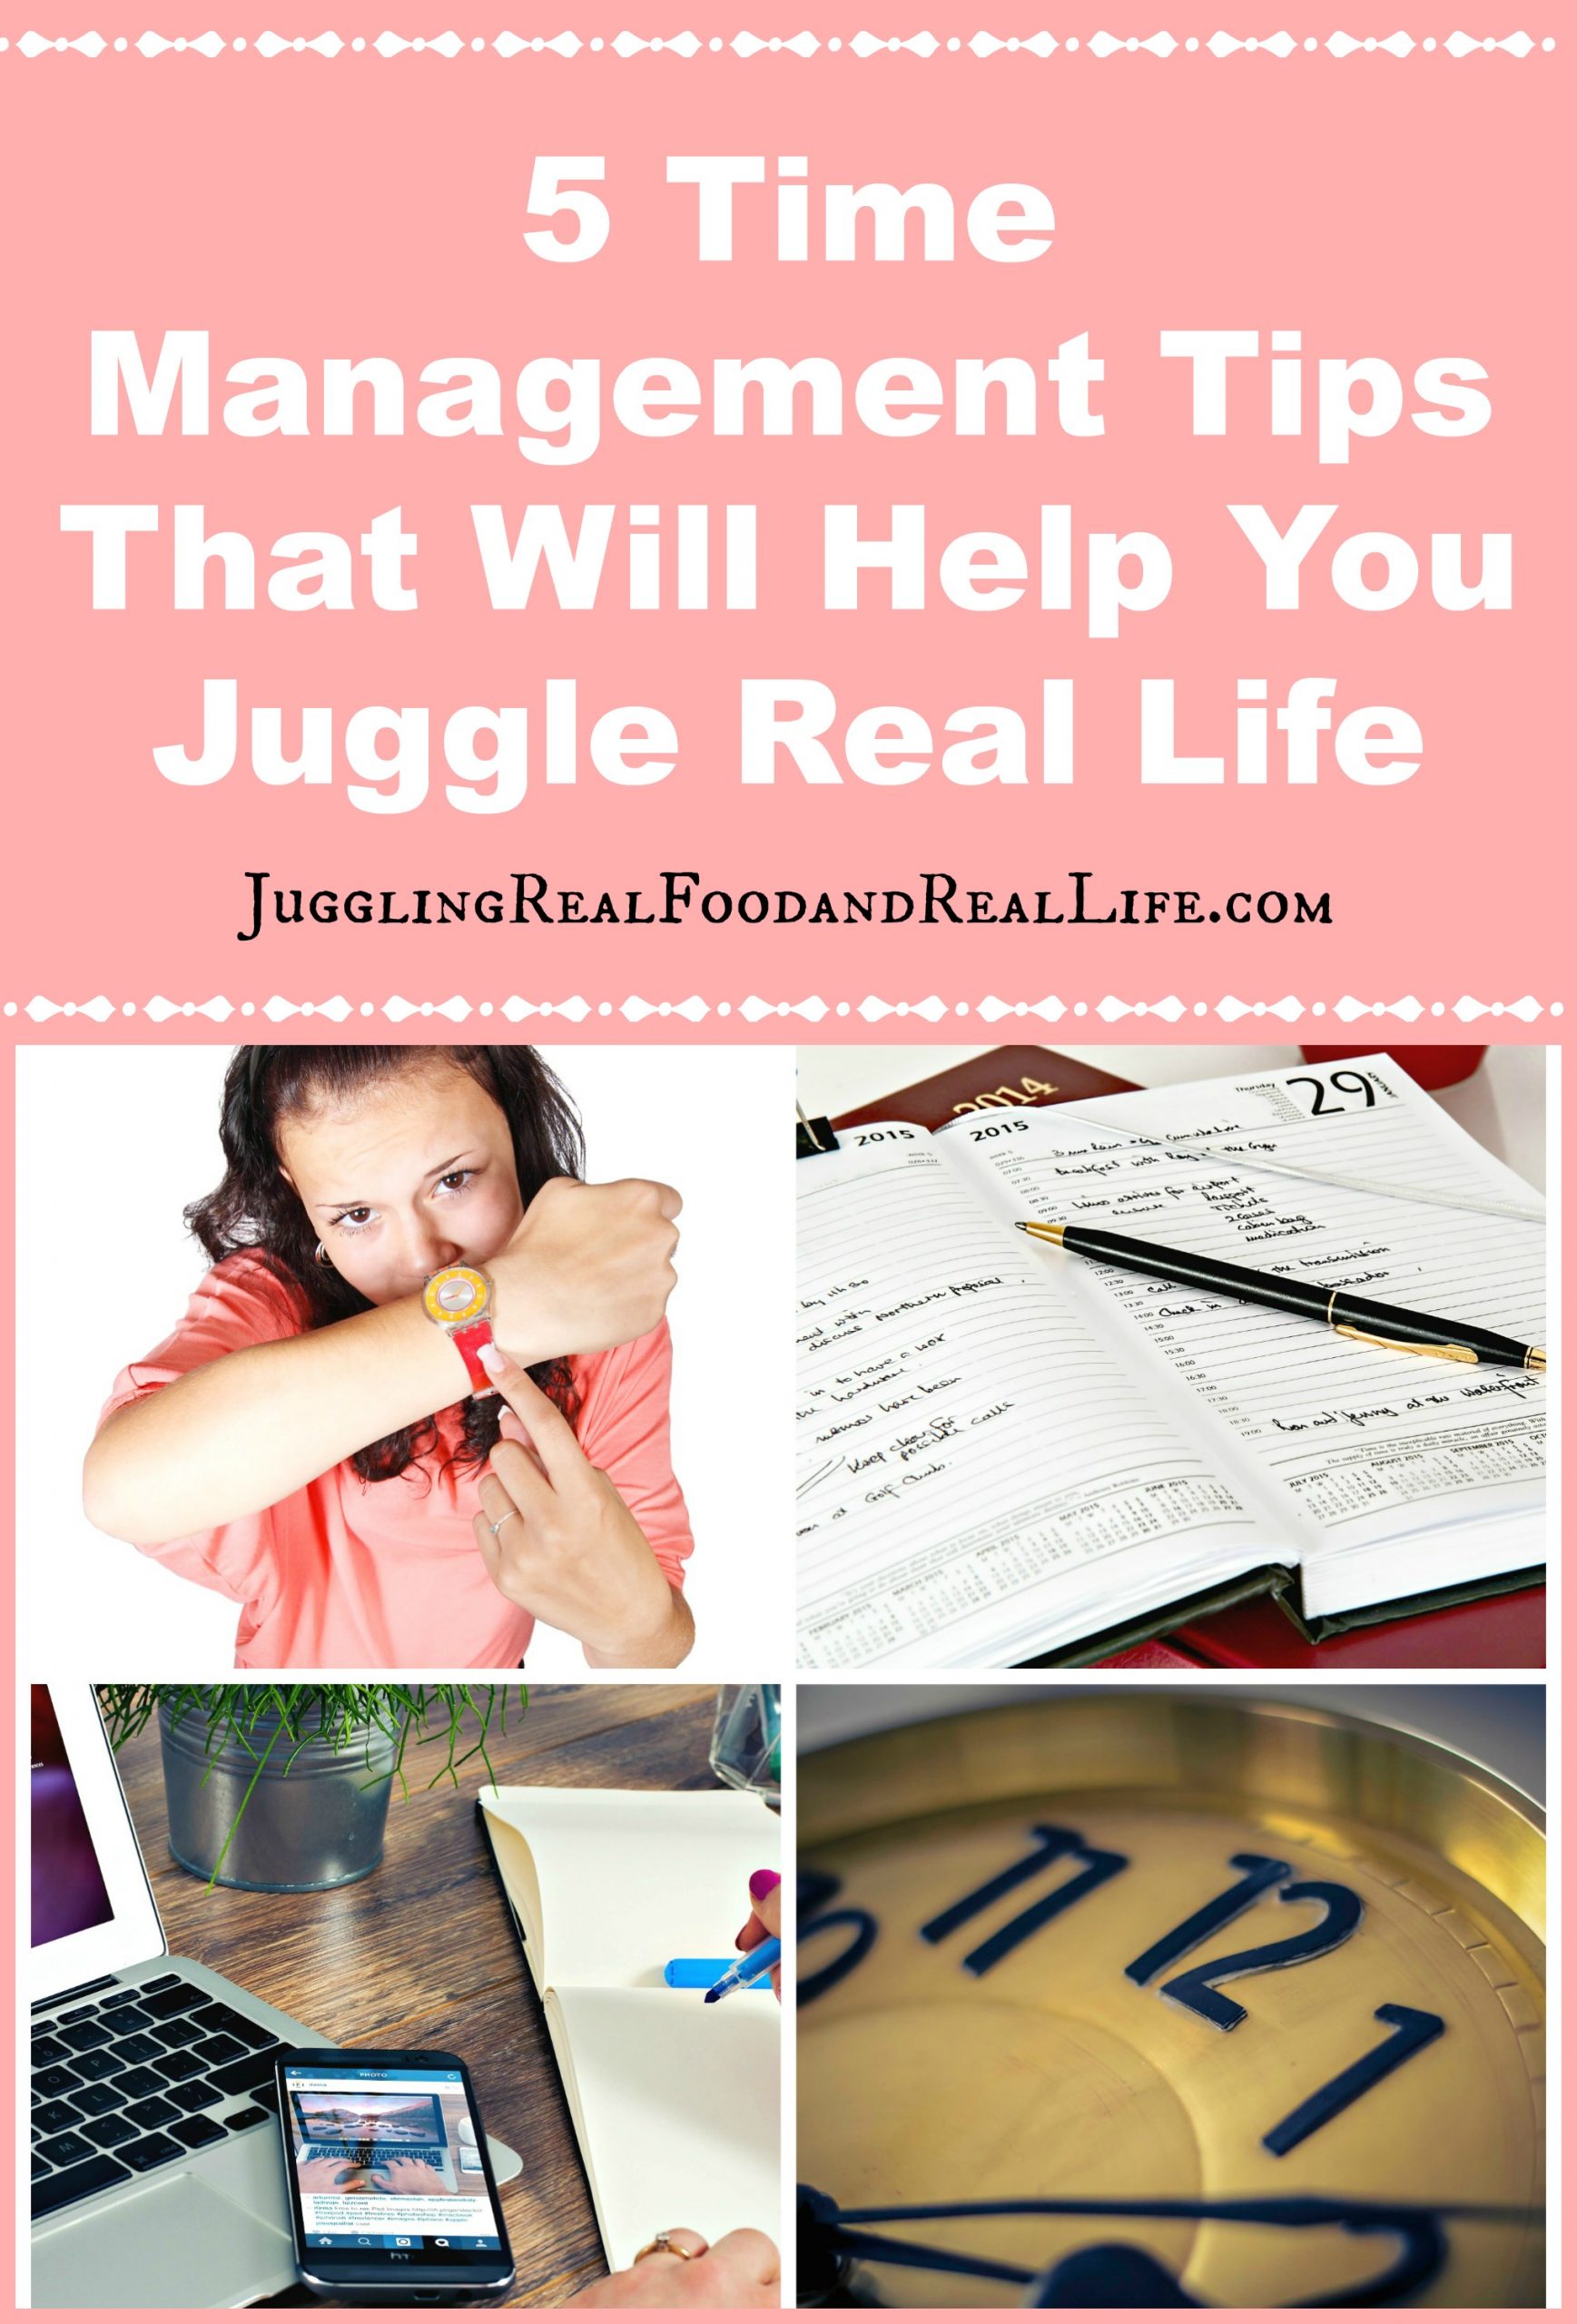 5 Time Management Tips That Will Help You Juggle Real Life